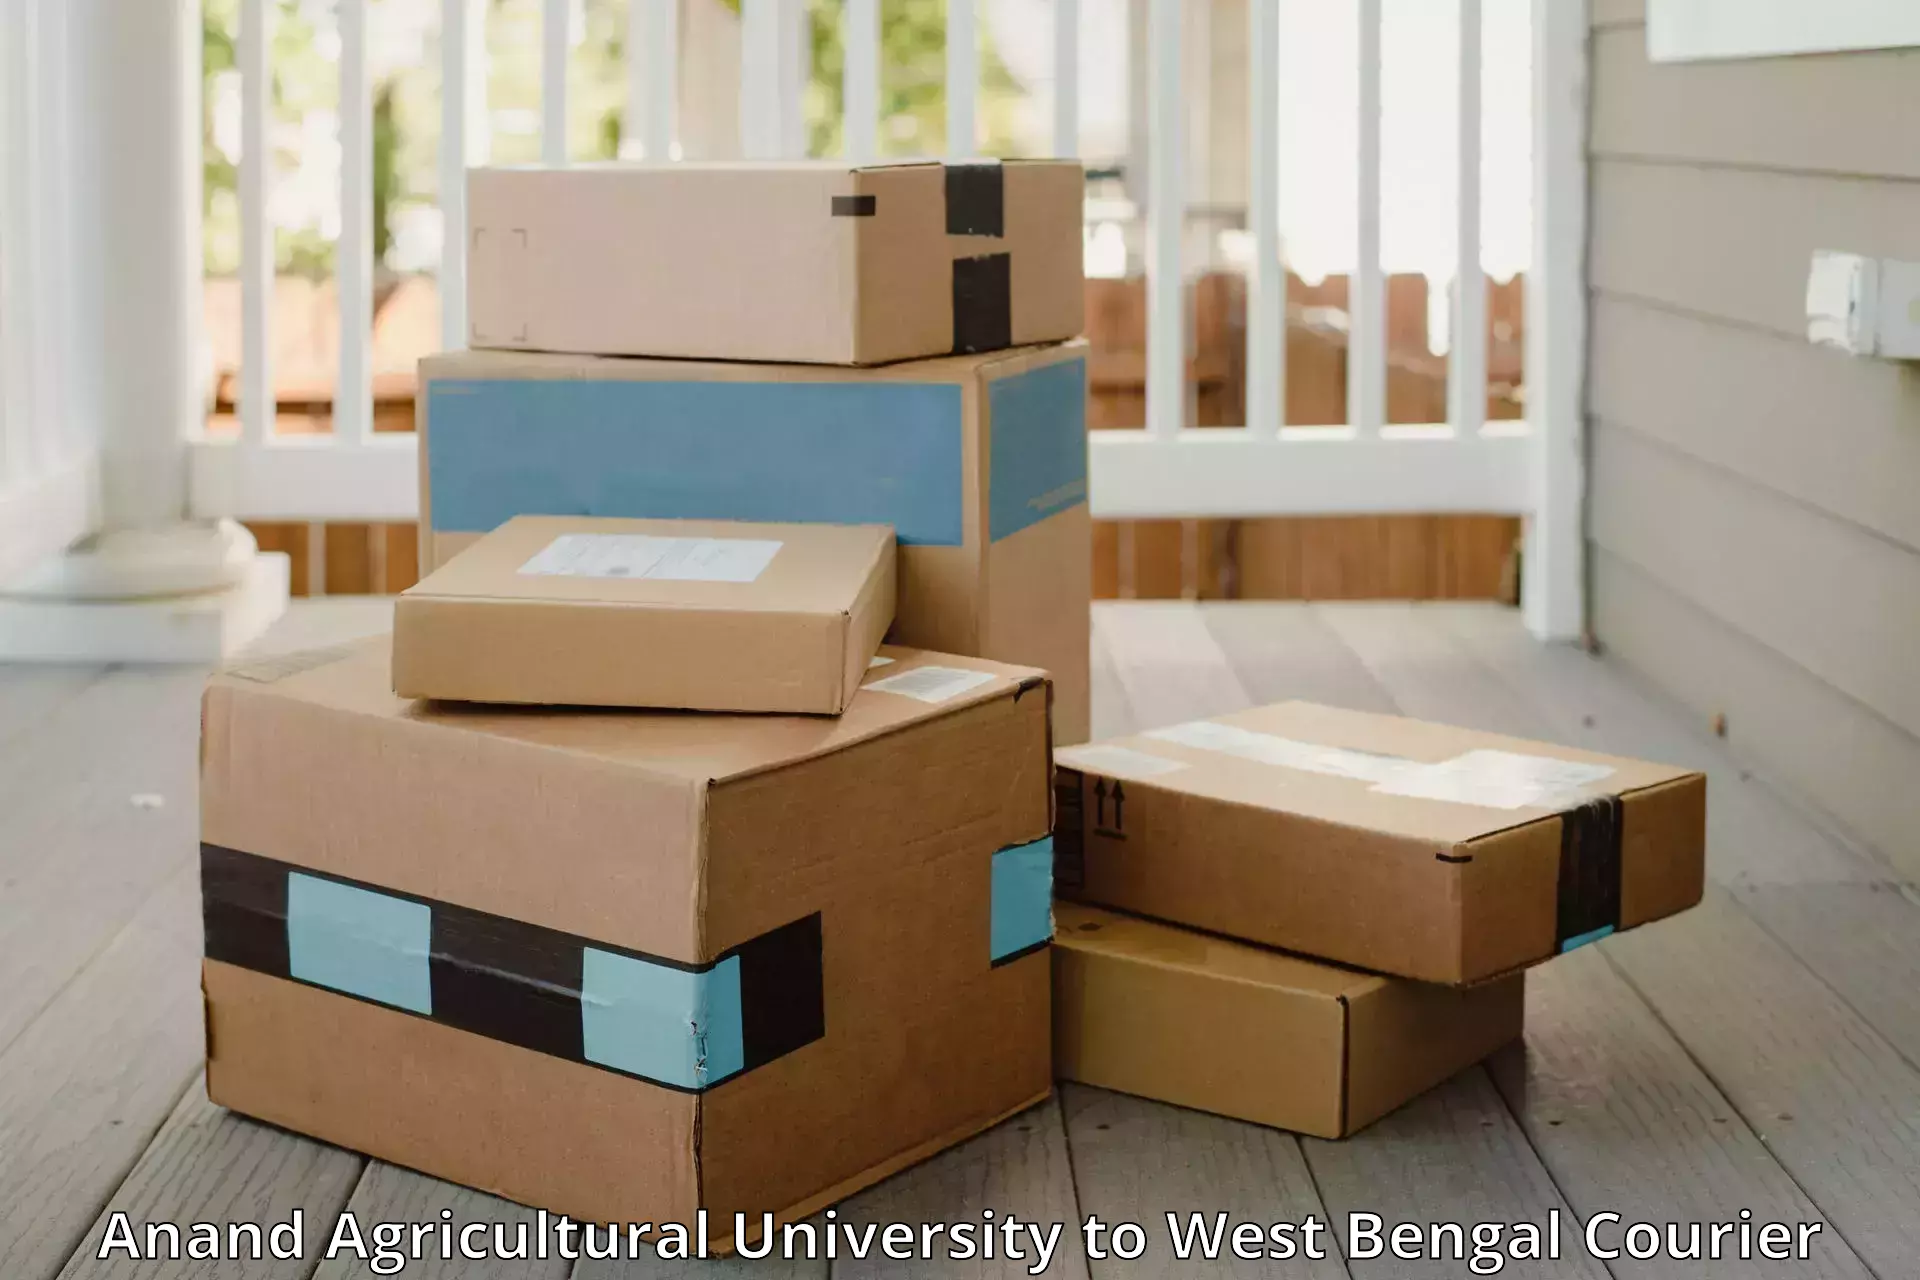 Express baggage shipping Anand Agricultural University to Baruipur